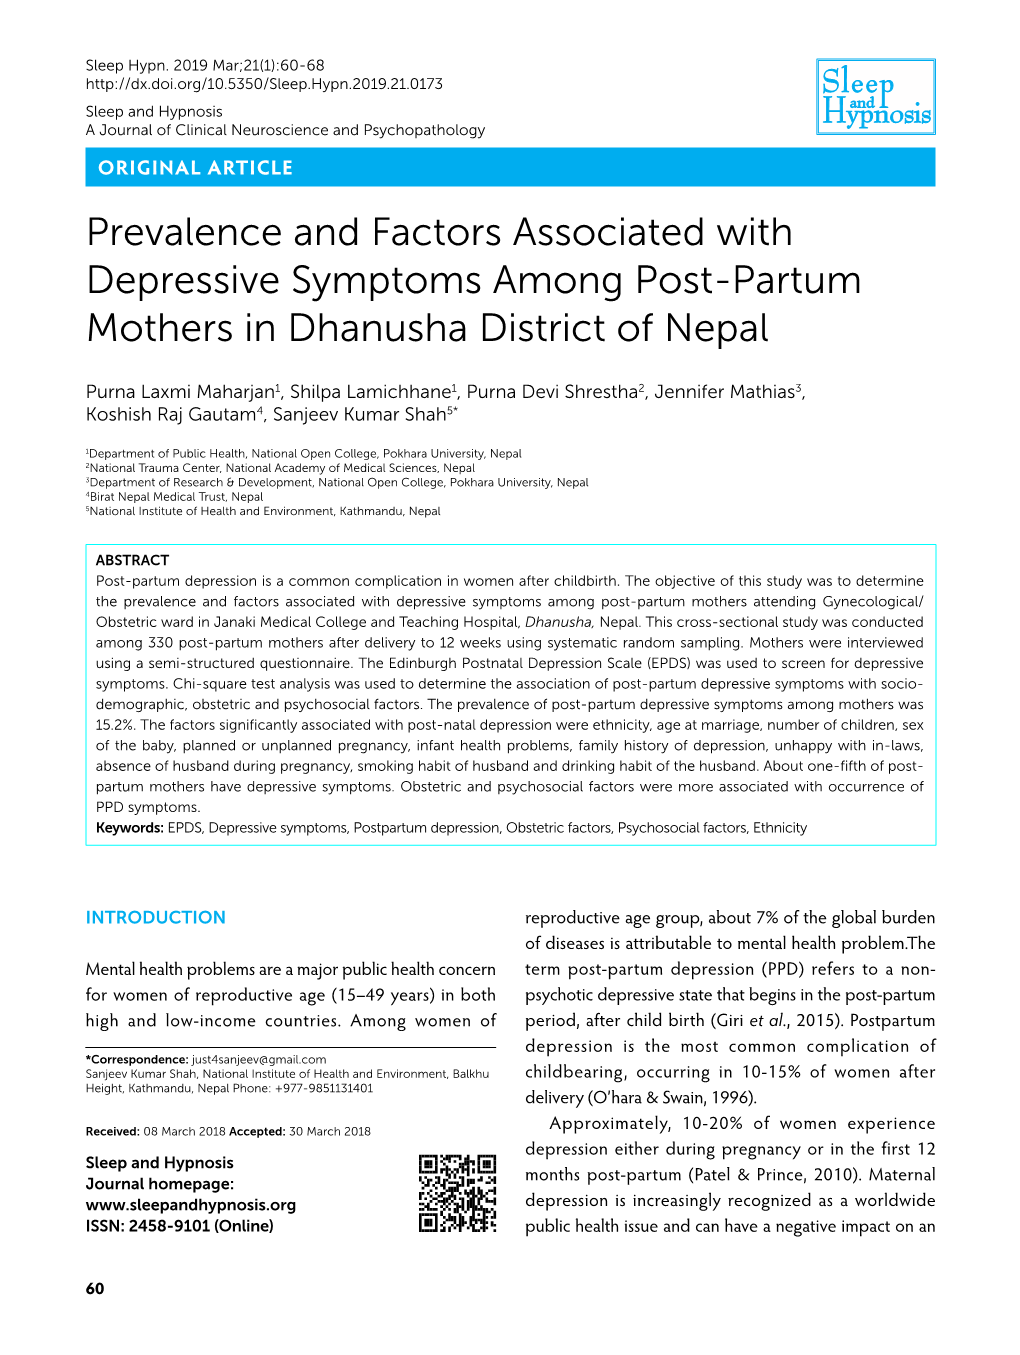 Prevalence and Factors Associated with Depressive Symptoms Among Post-Partum Mothers in Dhanusha District of Nepal